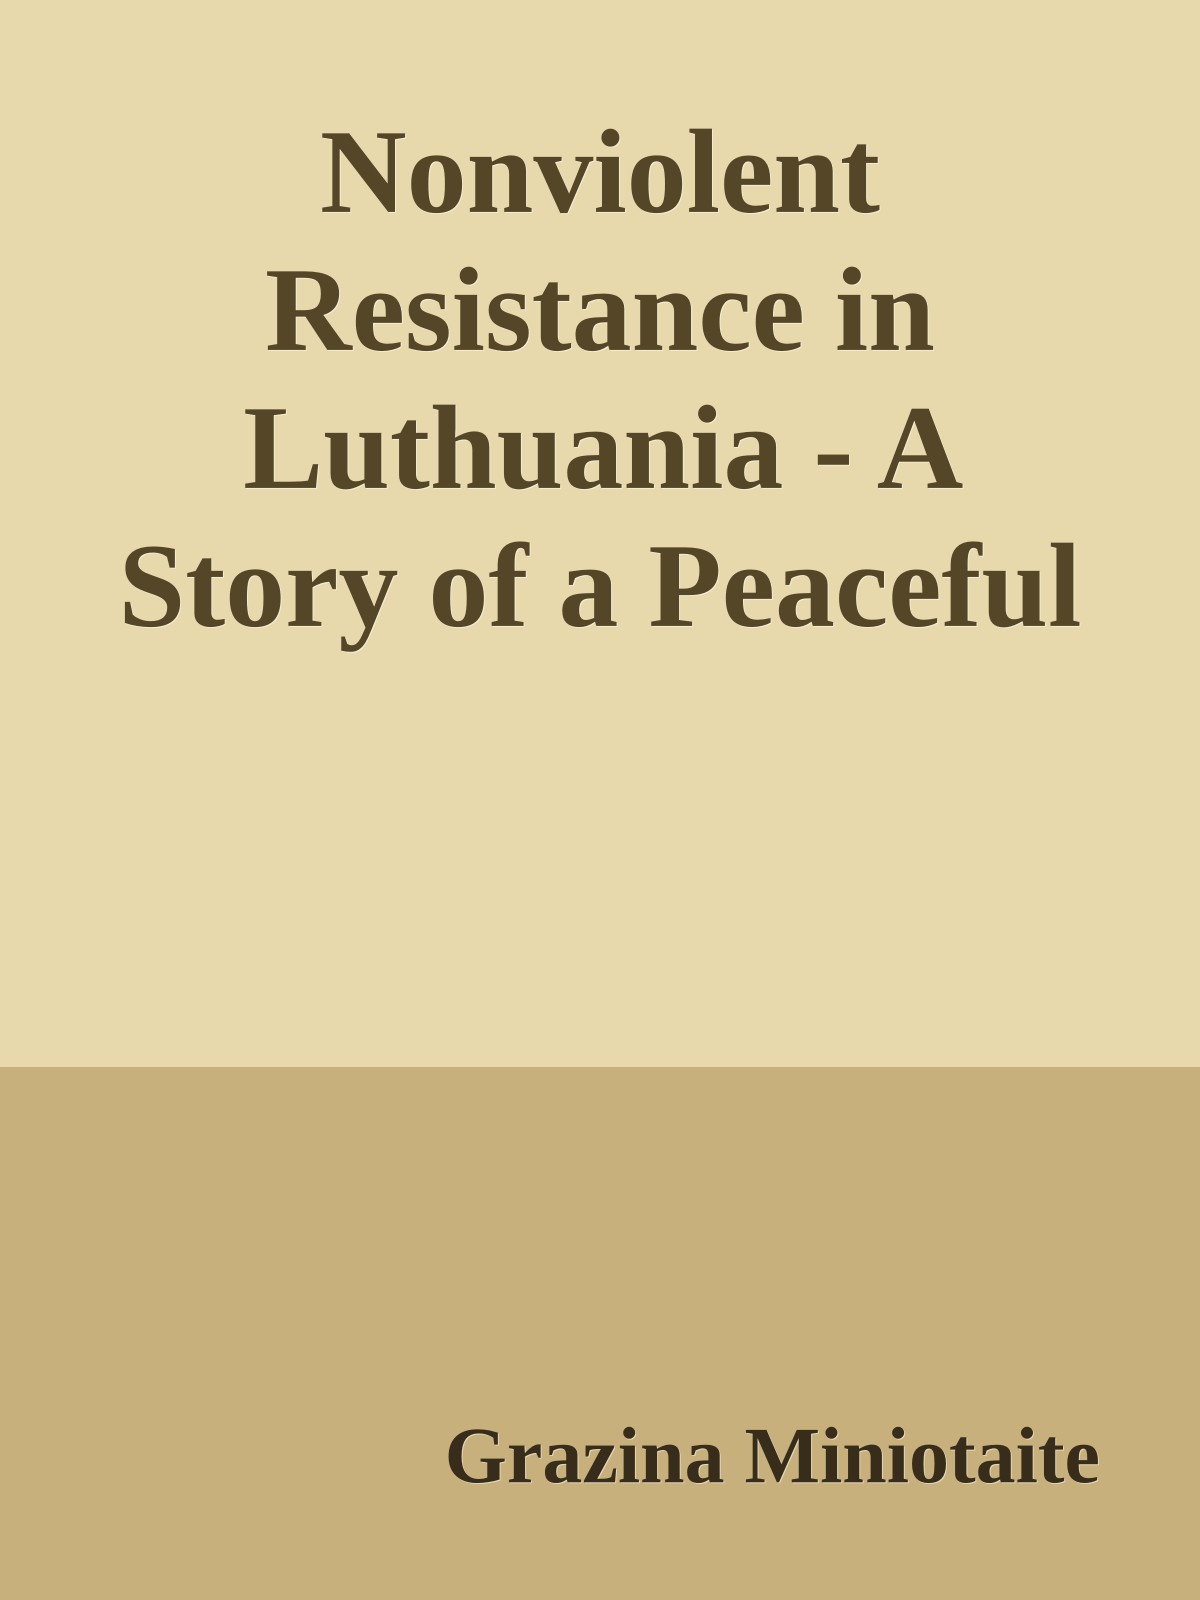 Nonviolent Resistance in Lithuania - A Story of a Peaceful Liberation (2005) by Grazina Miniotaite